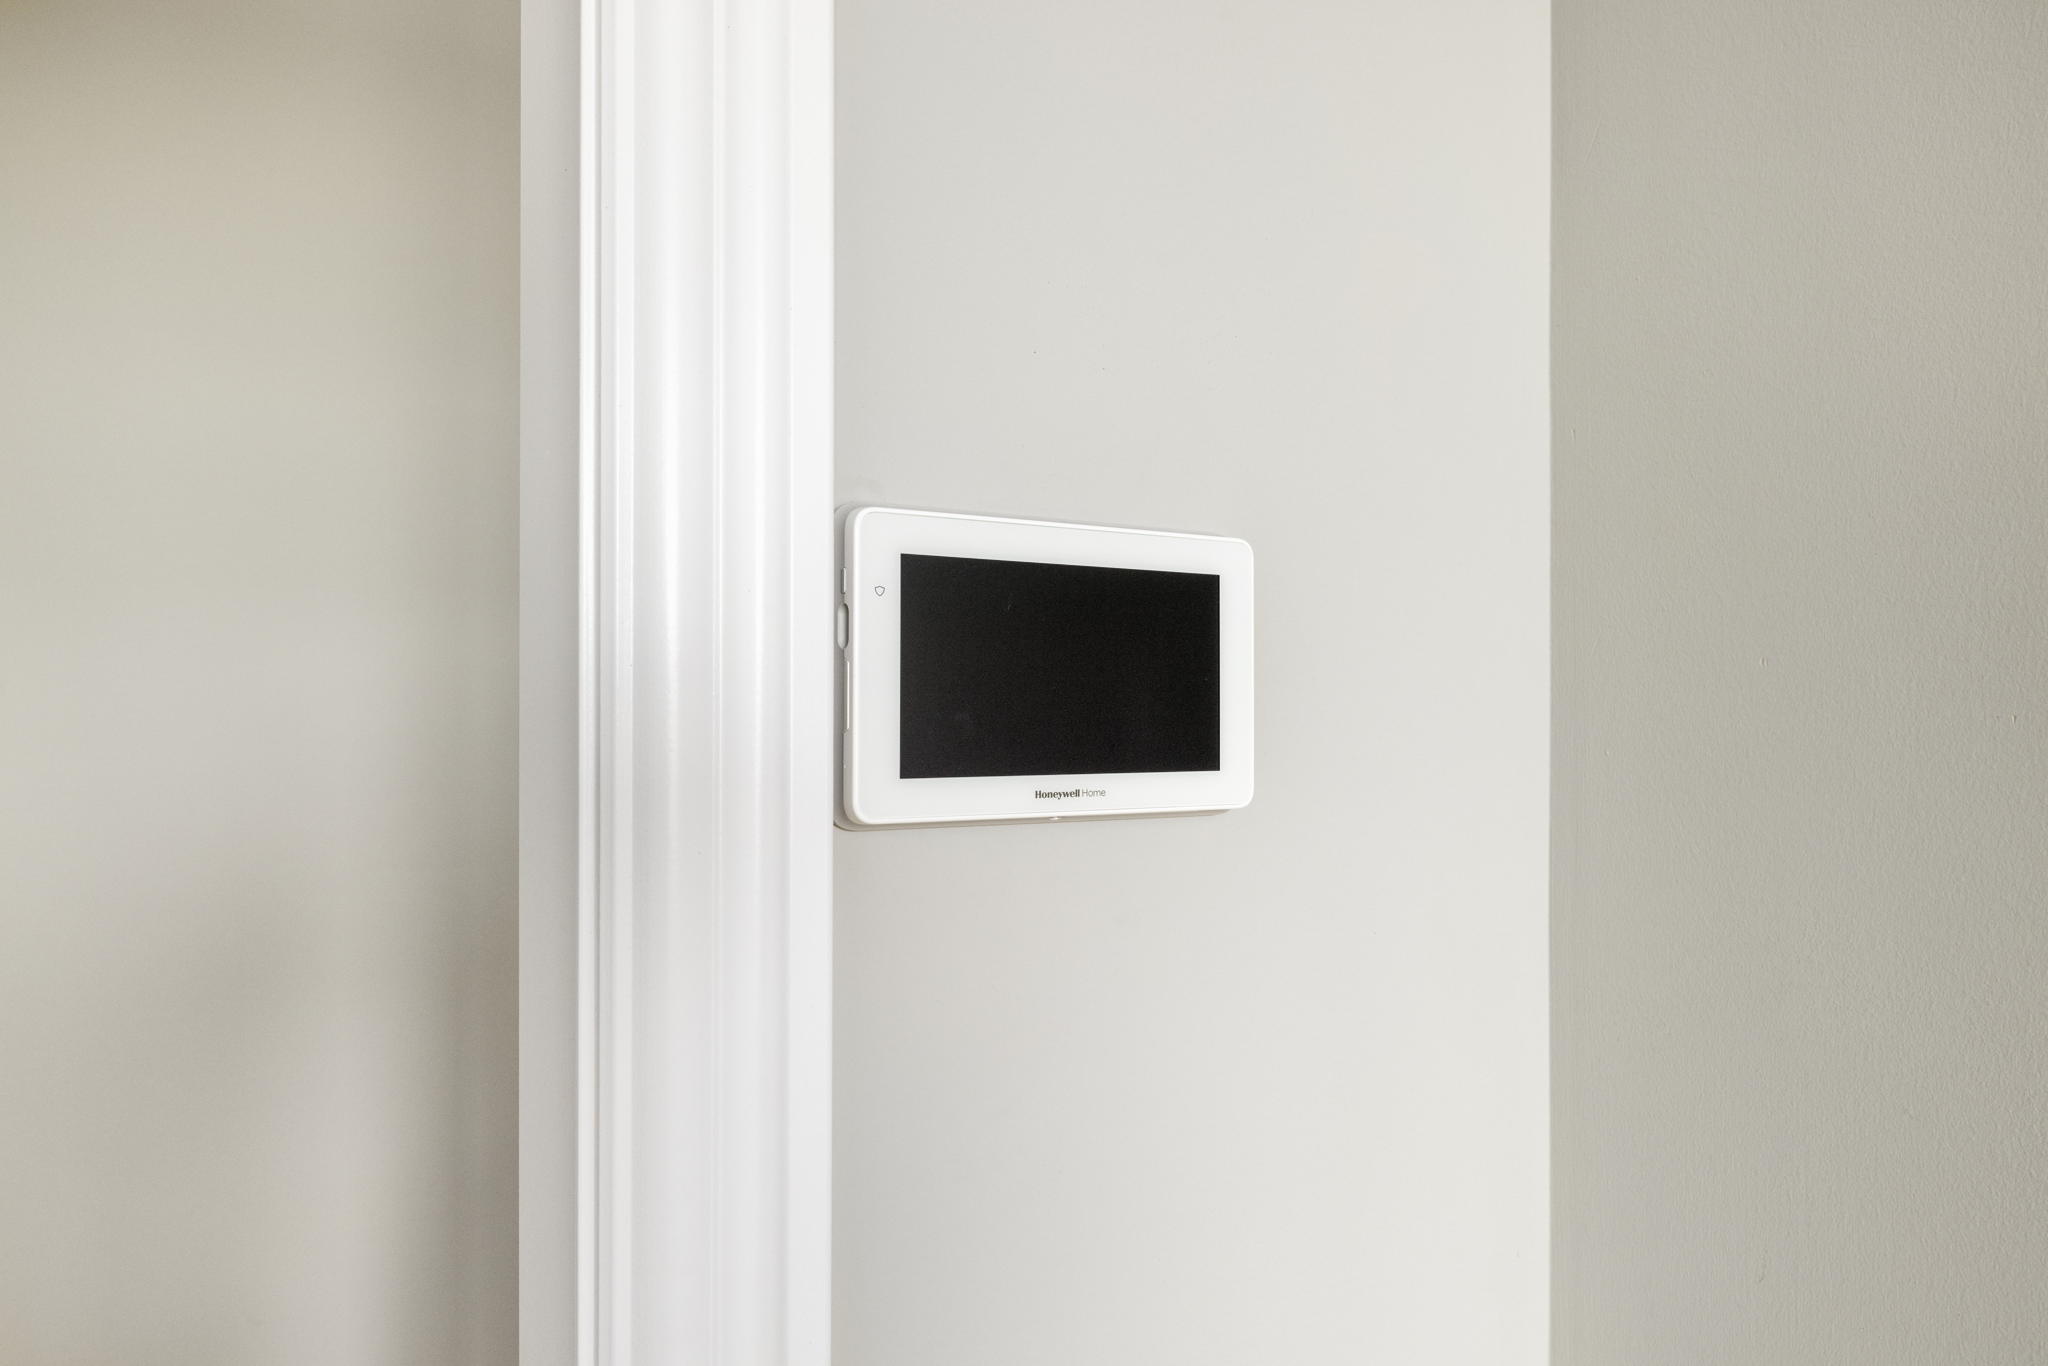 Woodline Building Company Project: Brick Ranch Interior Bedroom Smart Thermostat